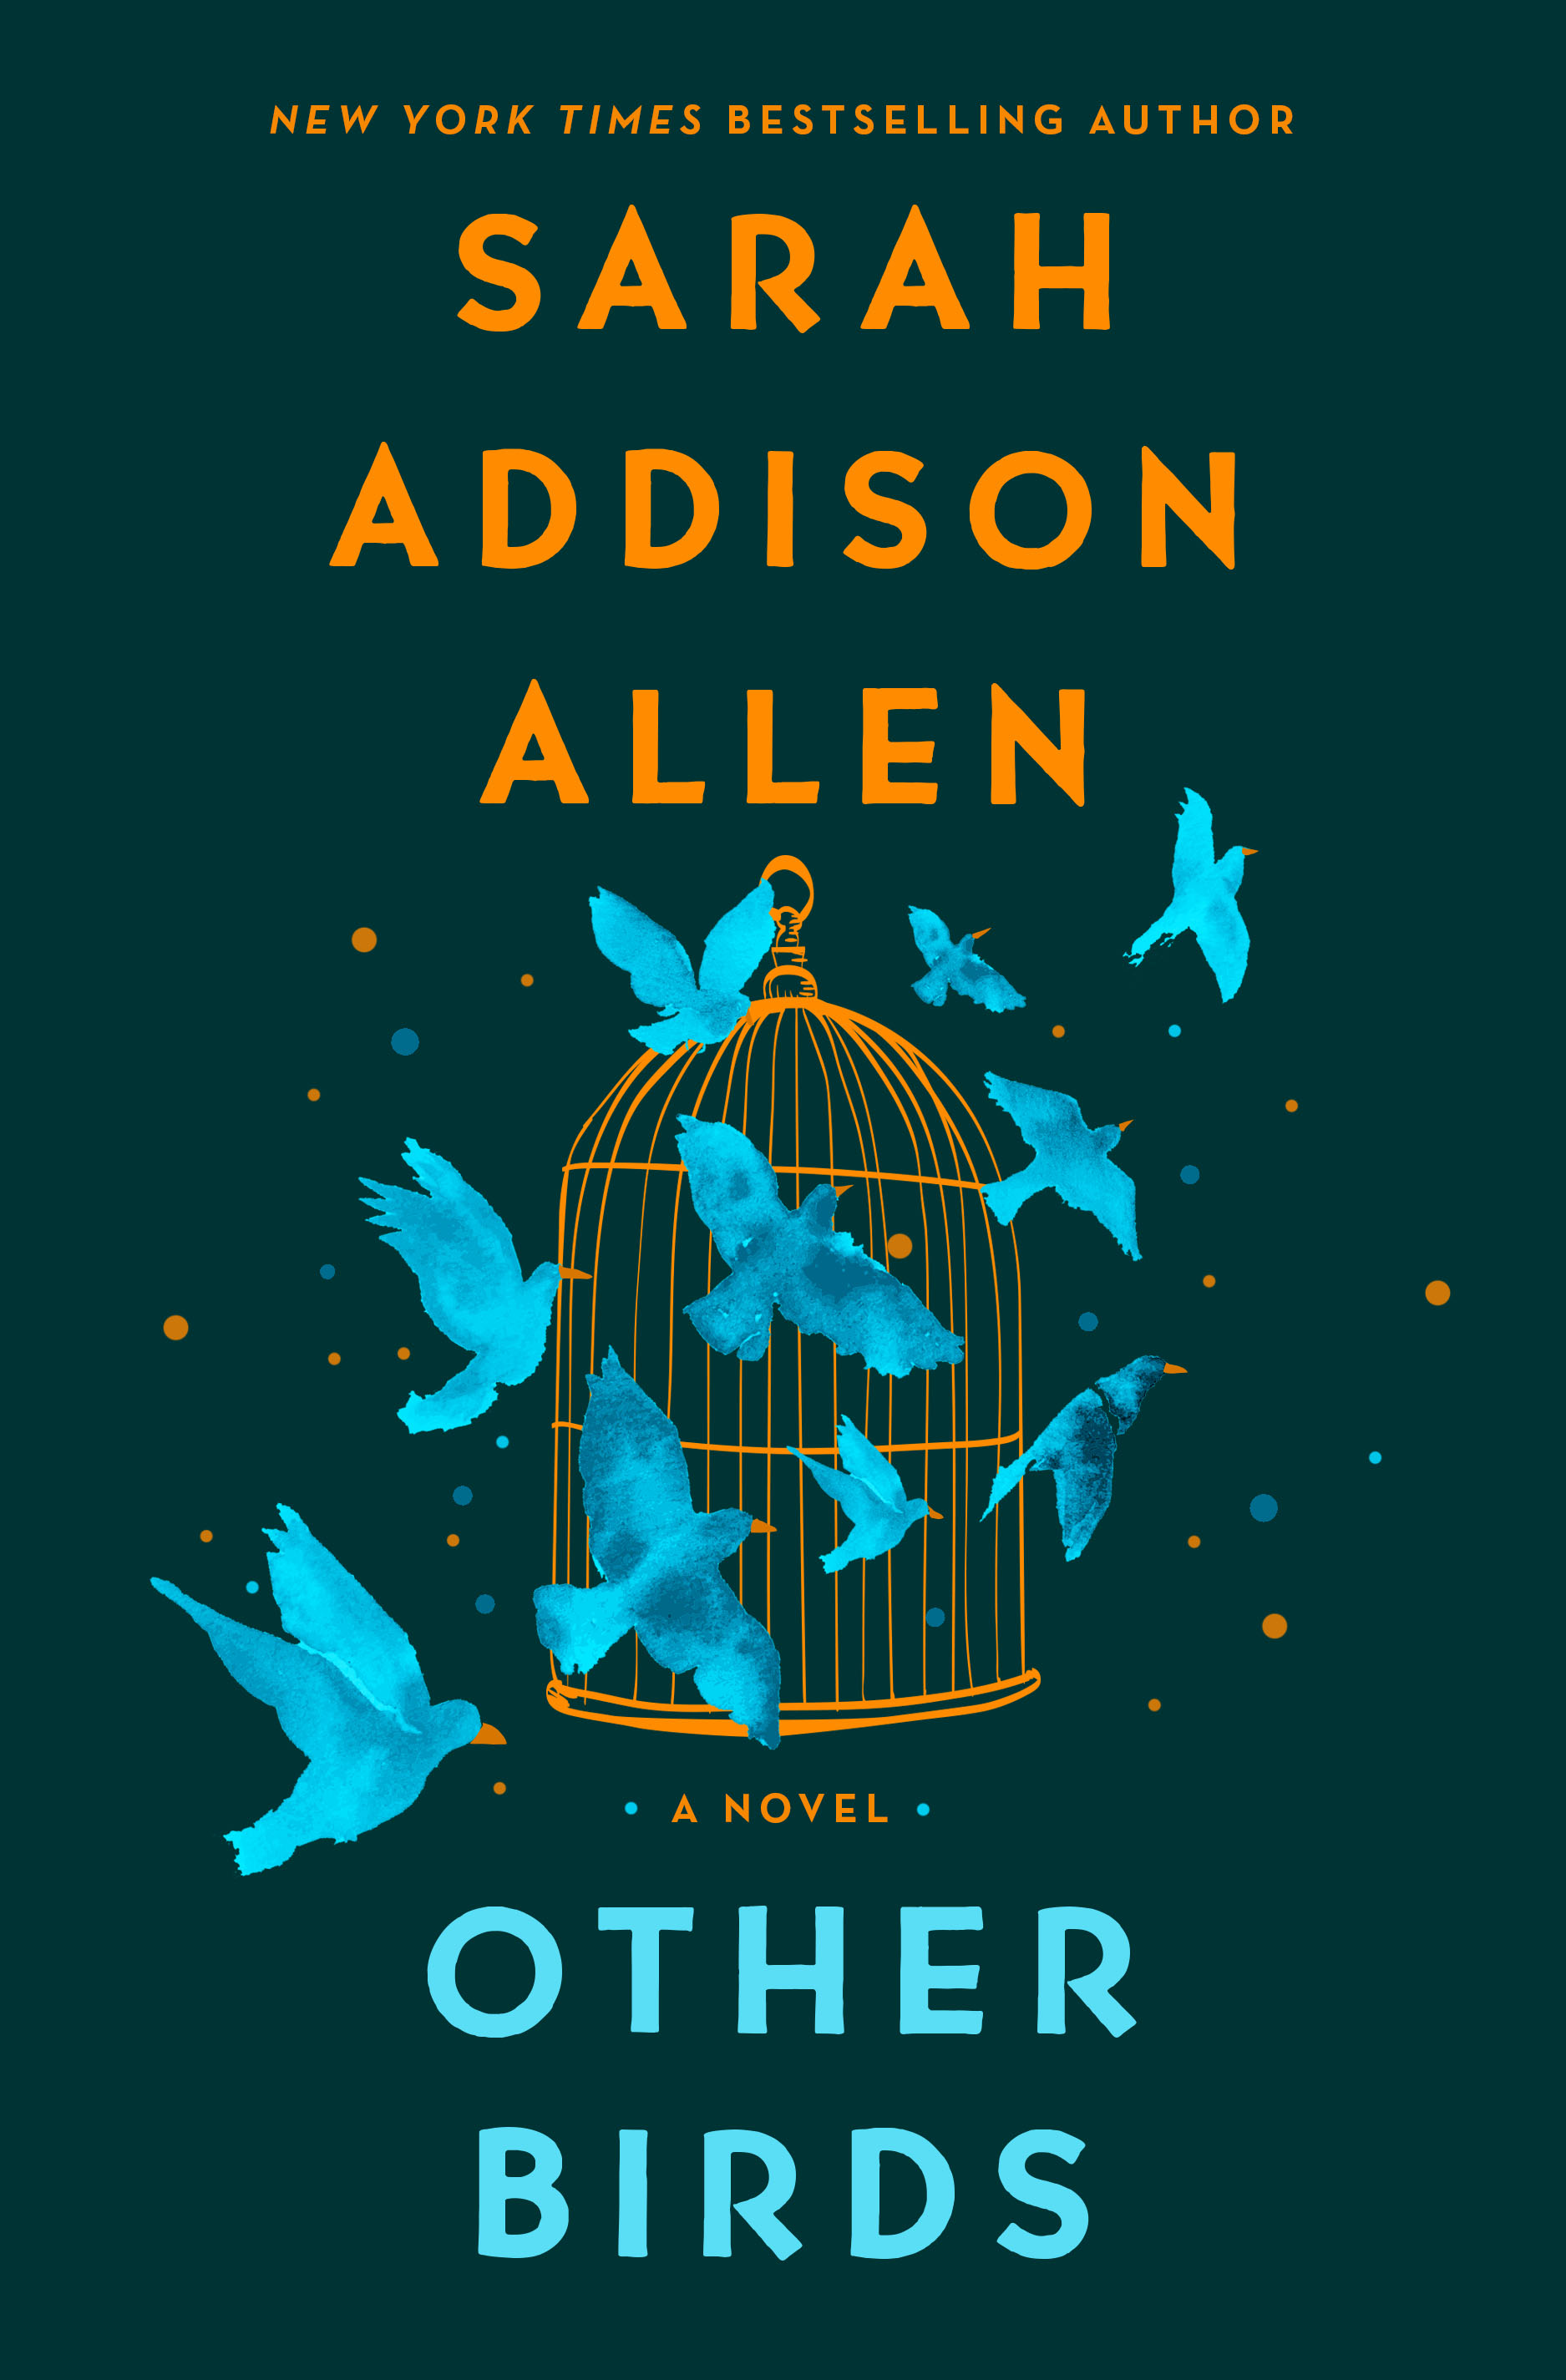 Book Cover for "Other Birds" by Sarah Addison Allen